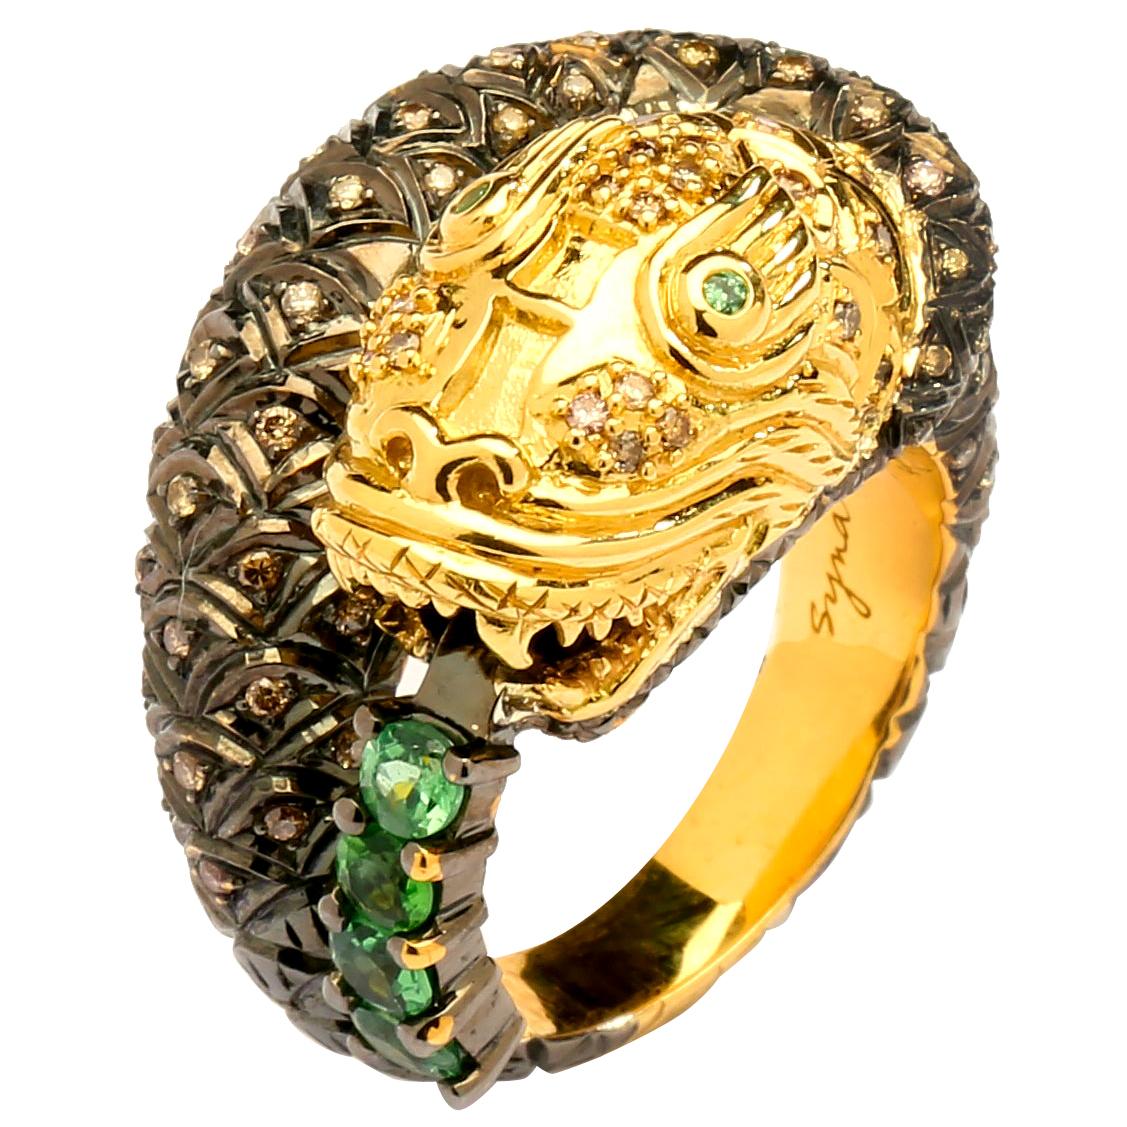 Syna Gold Oxidized Silver Snake Ring with Tsavorite and Diamonds